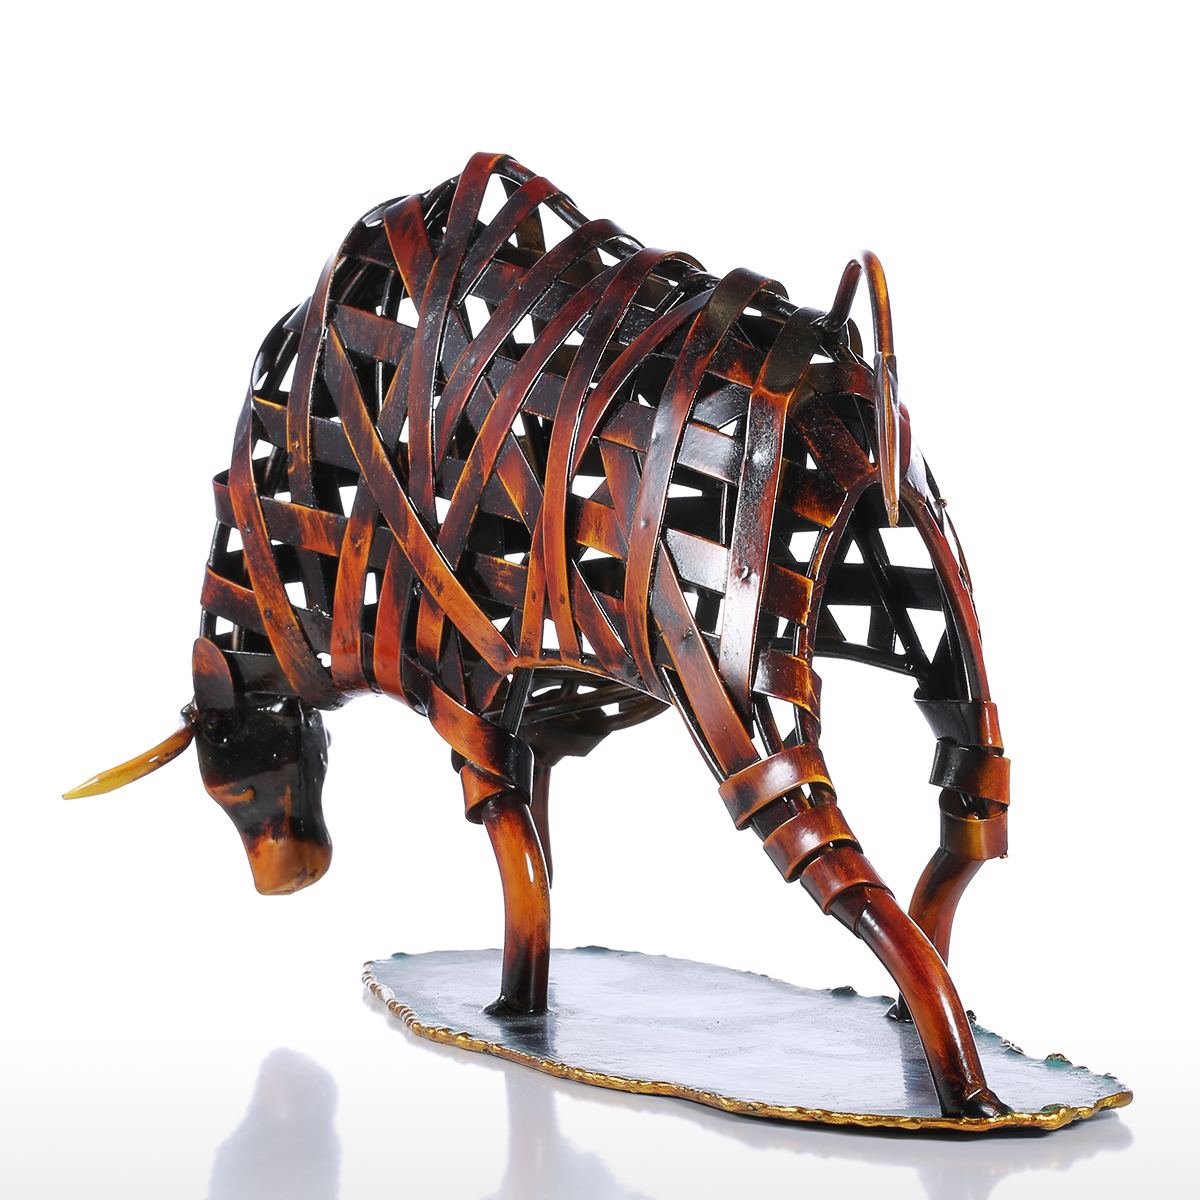 Durable Iron-made Braided Cattle Metal Sculpture Home Office Decor